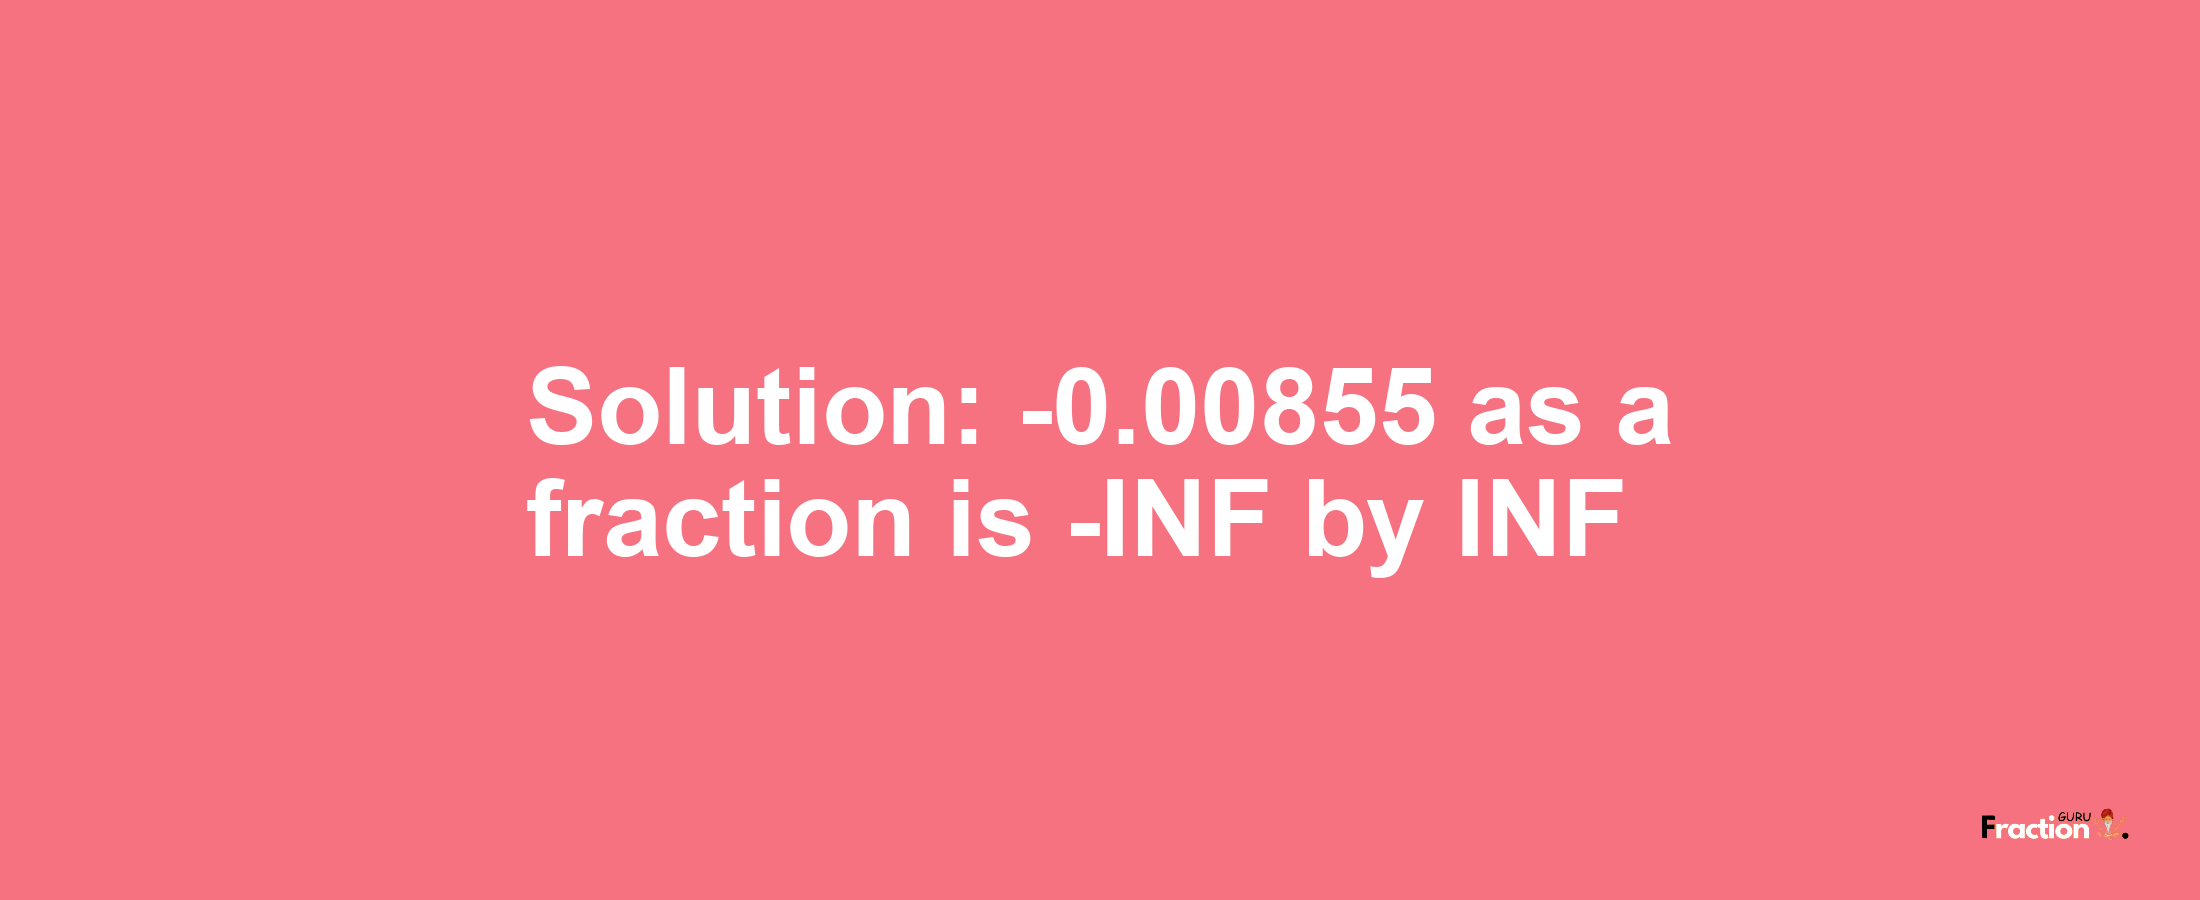 Solution:-0.00855 as a fraction is -INF/INF